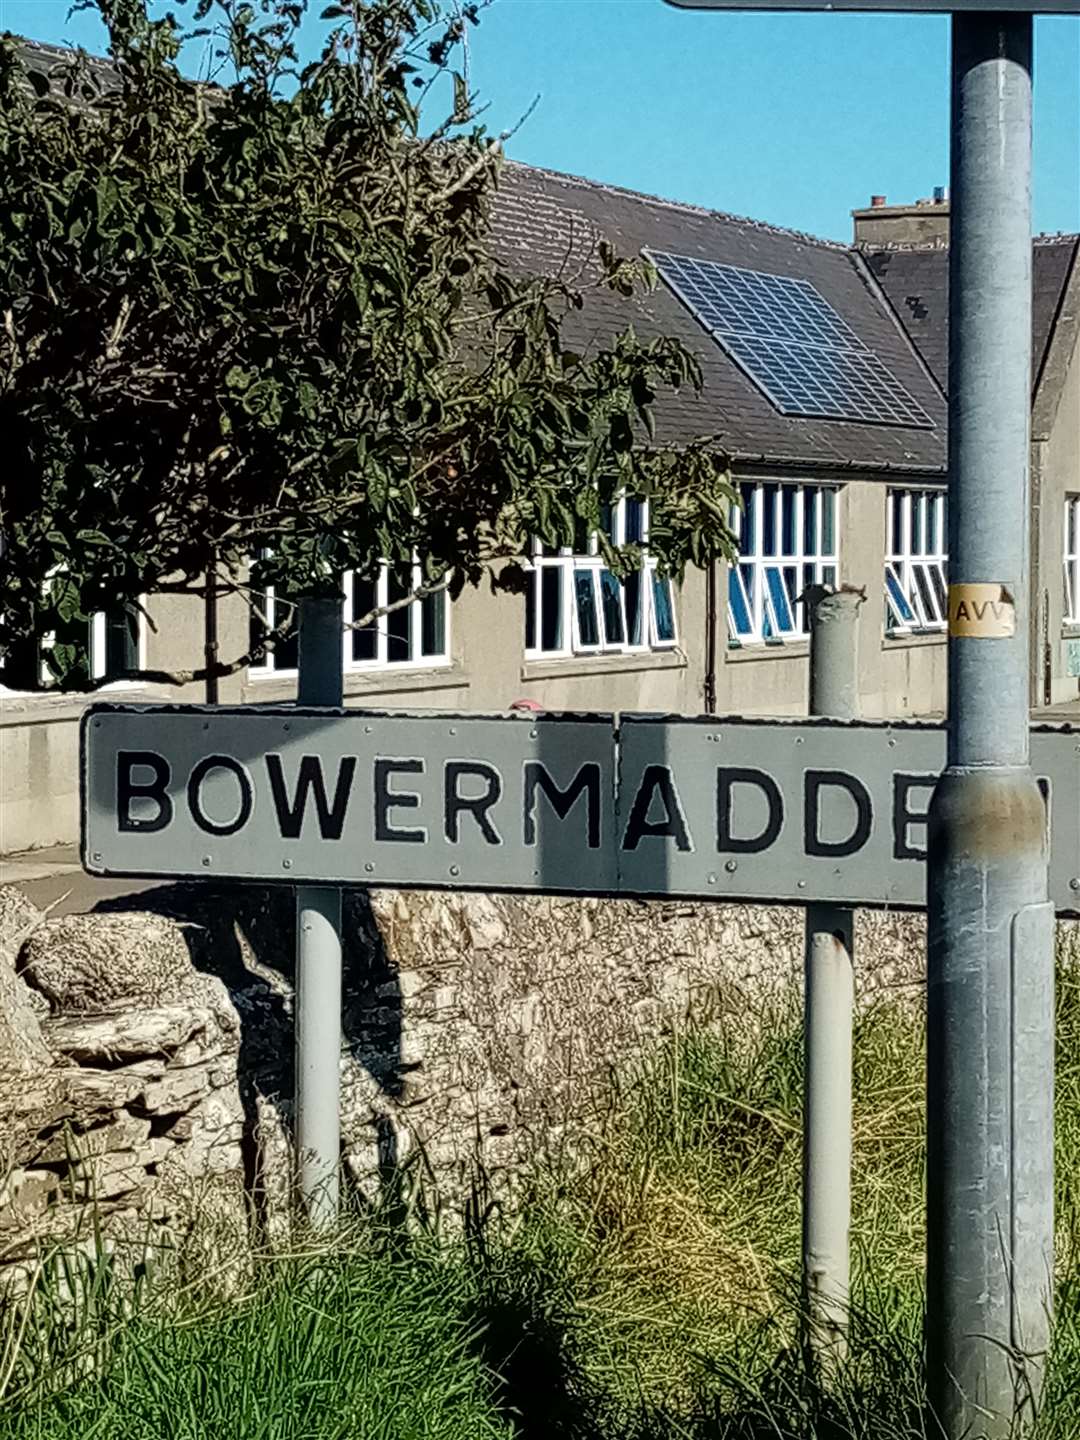 The Bowermadden sign was placed at Castletown school